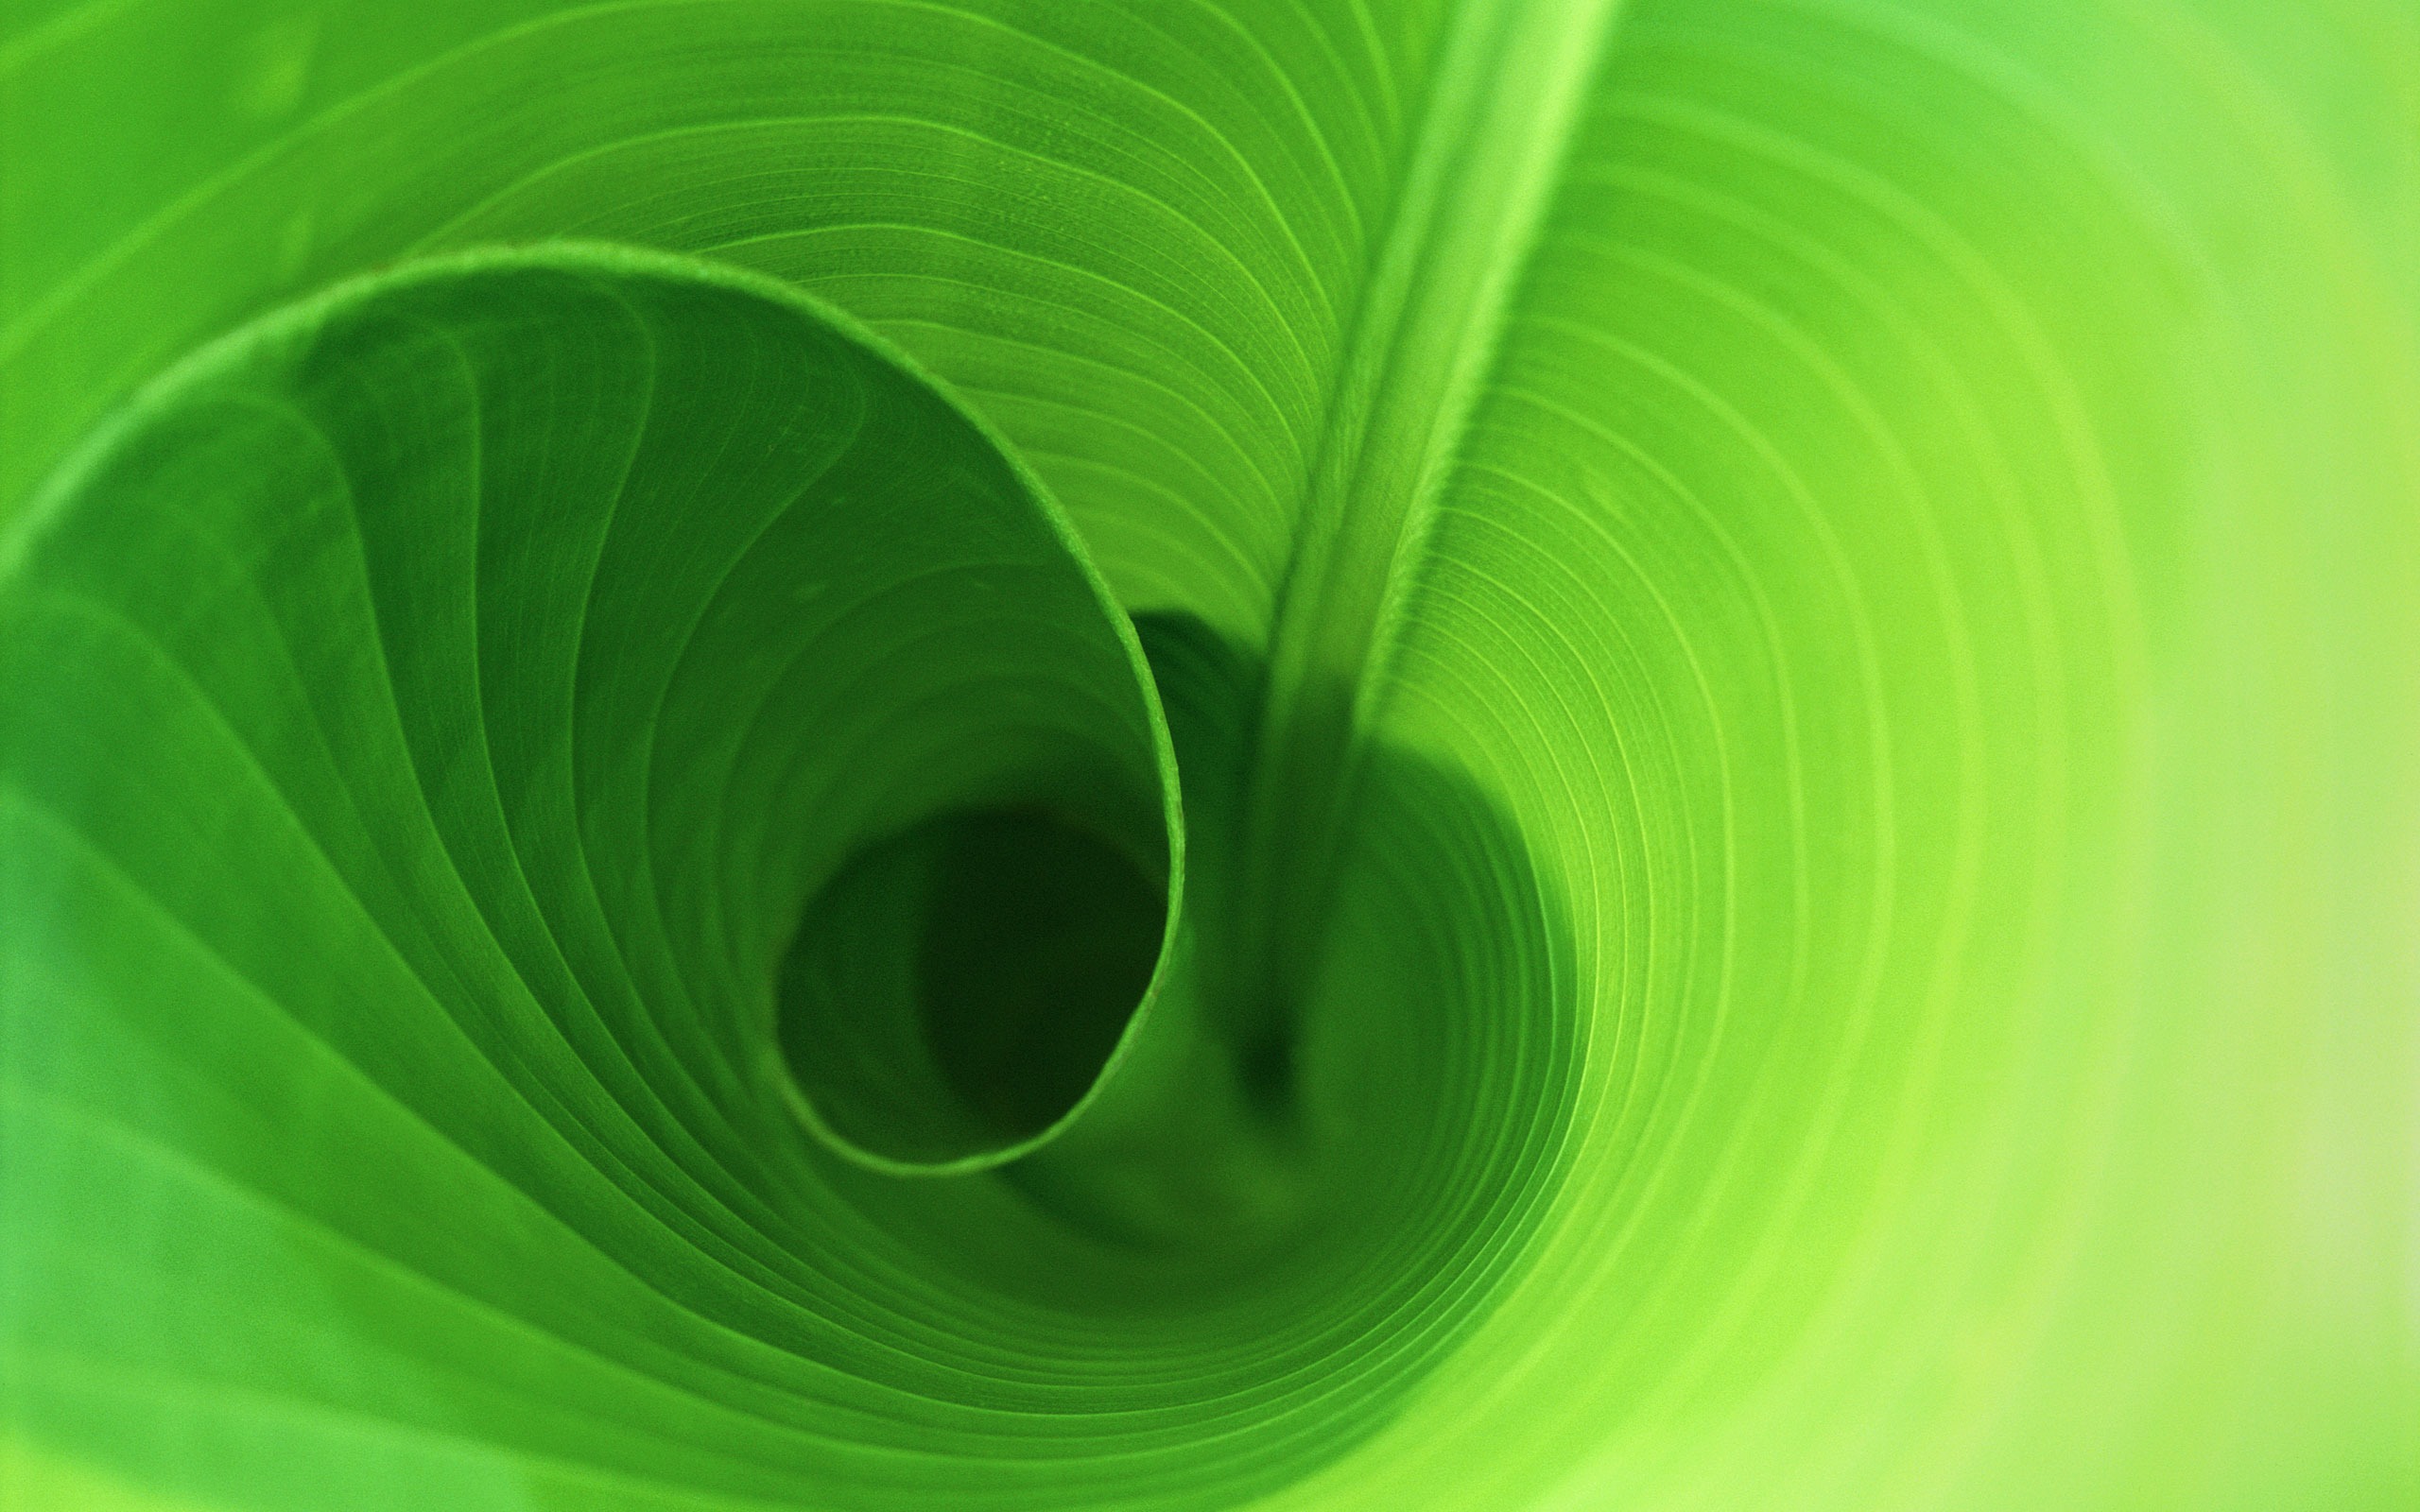 Large green leaves close-up flower wallpaper (2) #3 - 2560x1600